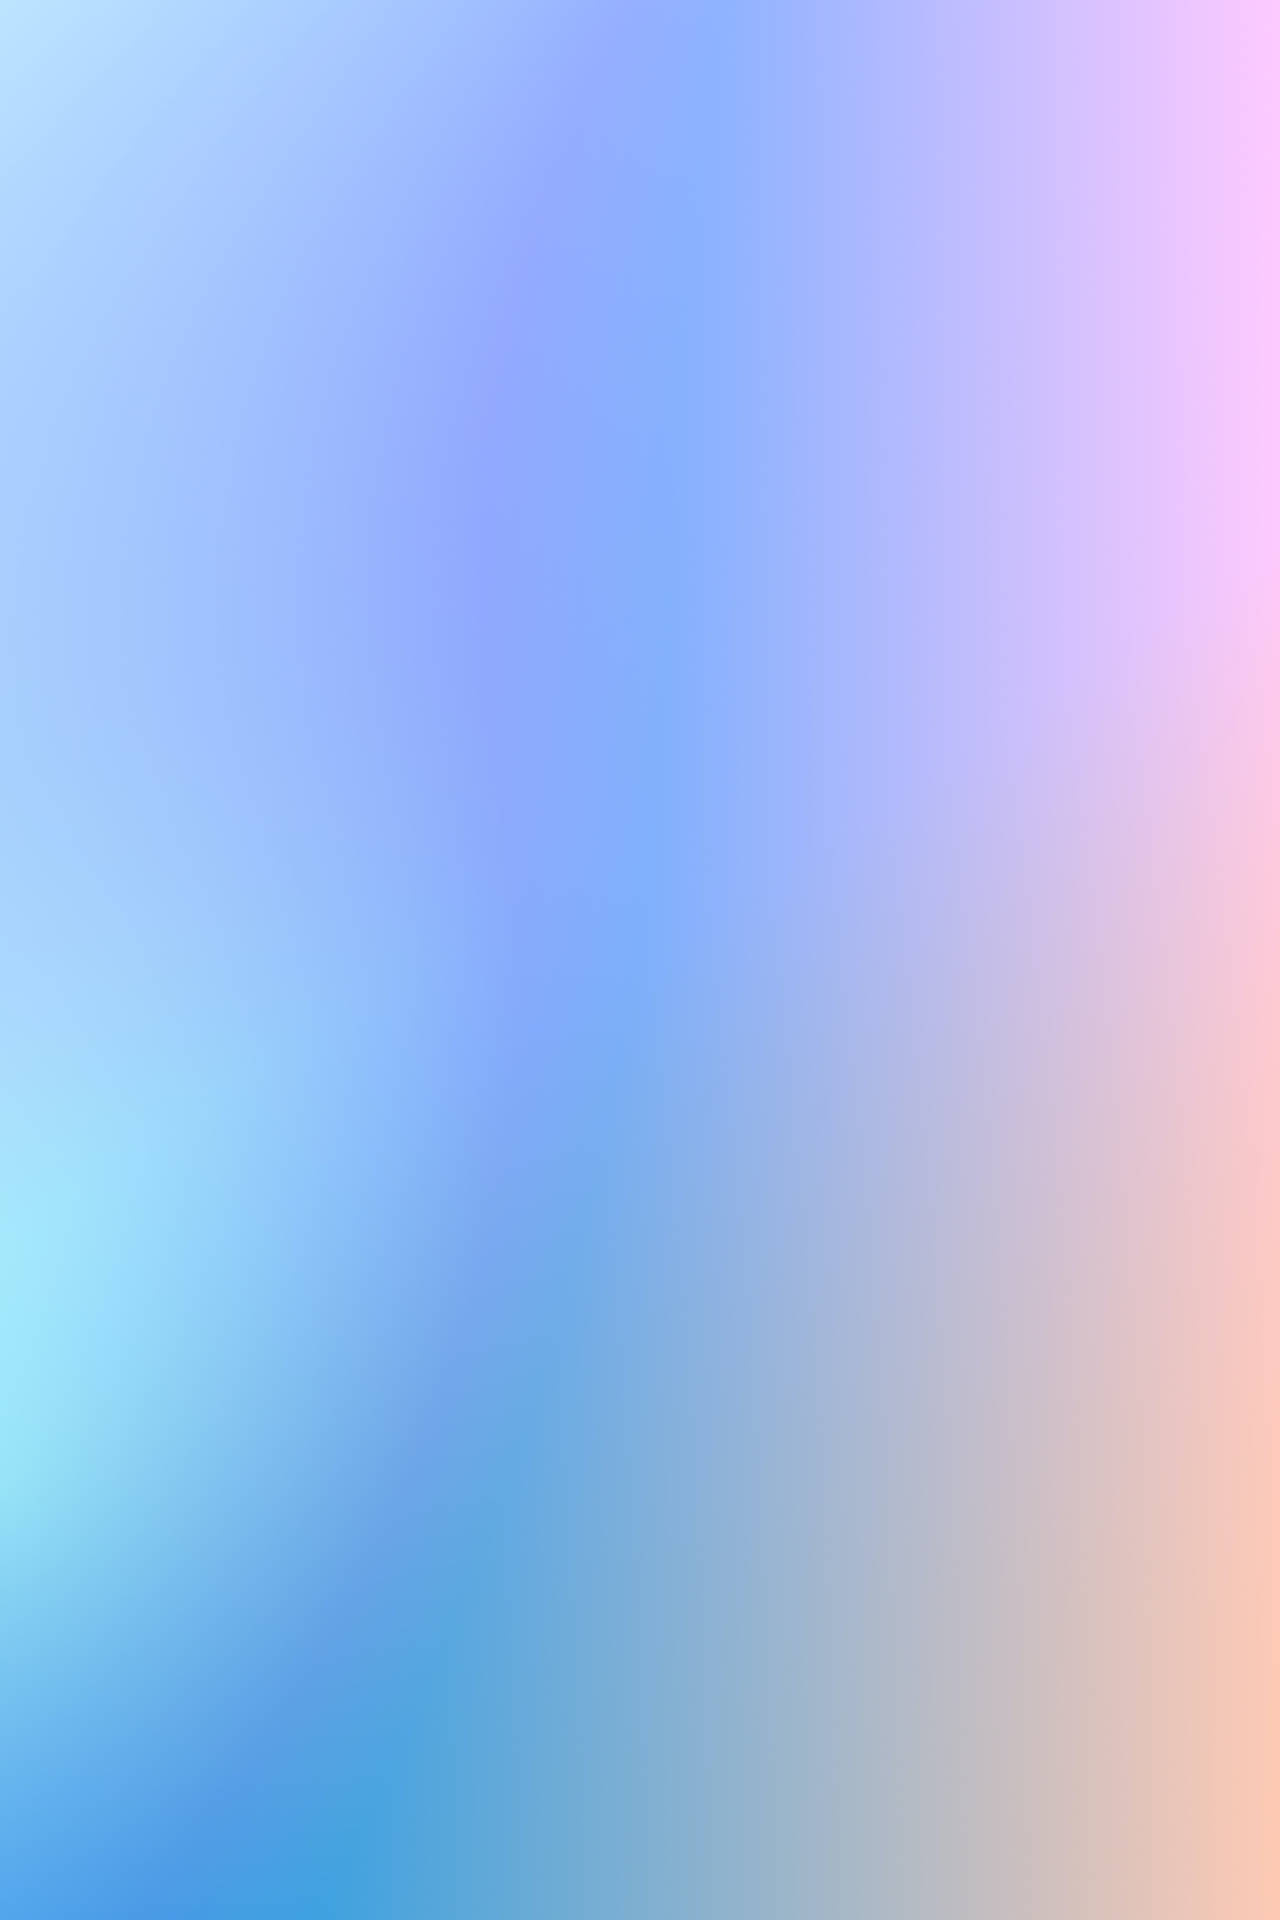 Gradient 4000X6000 Wallpaper and Background Image